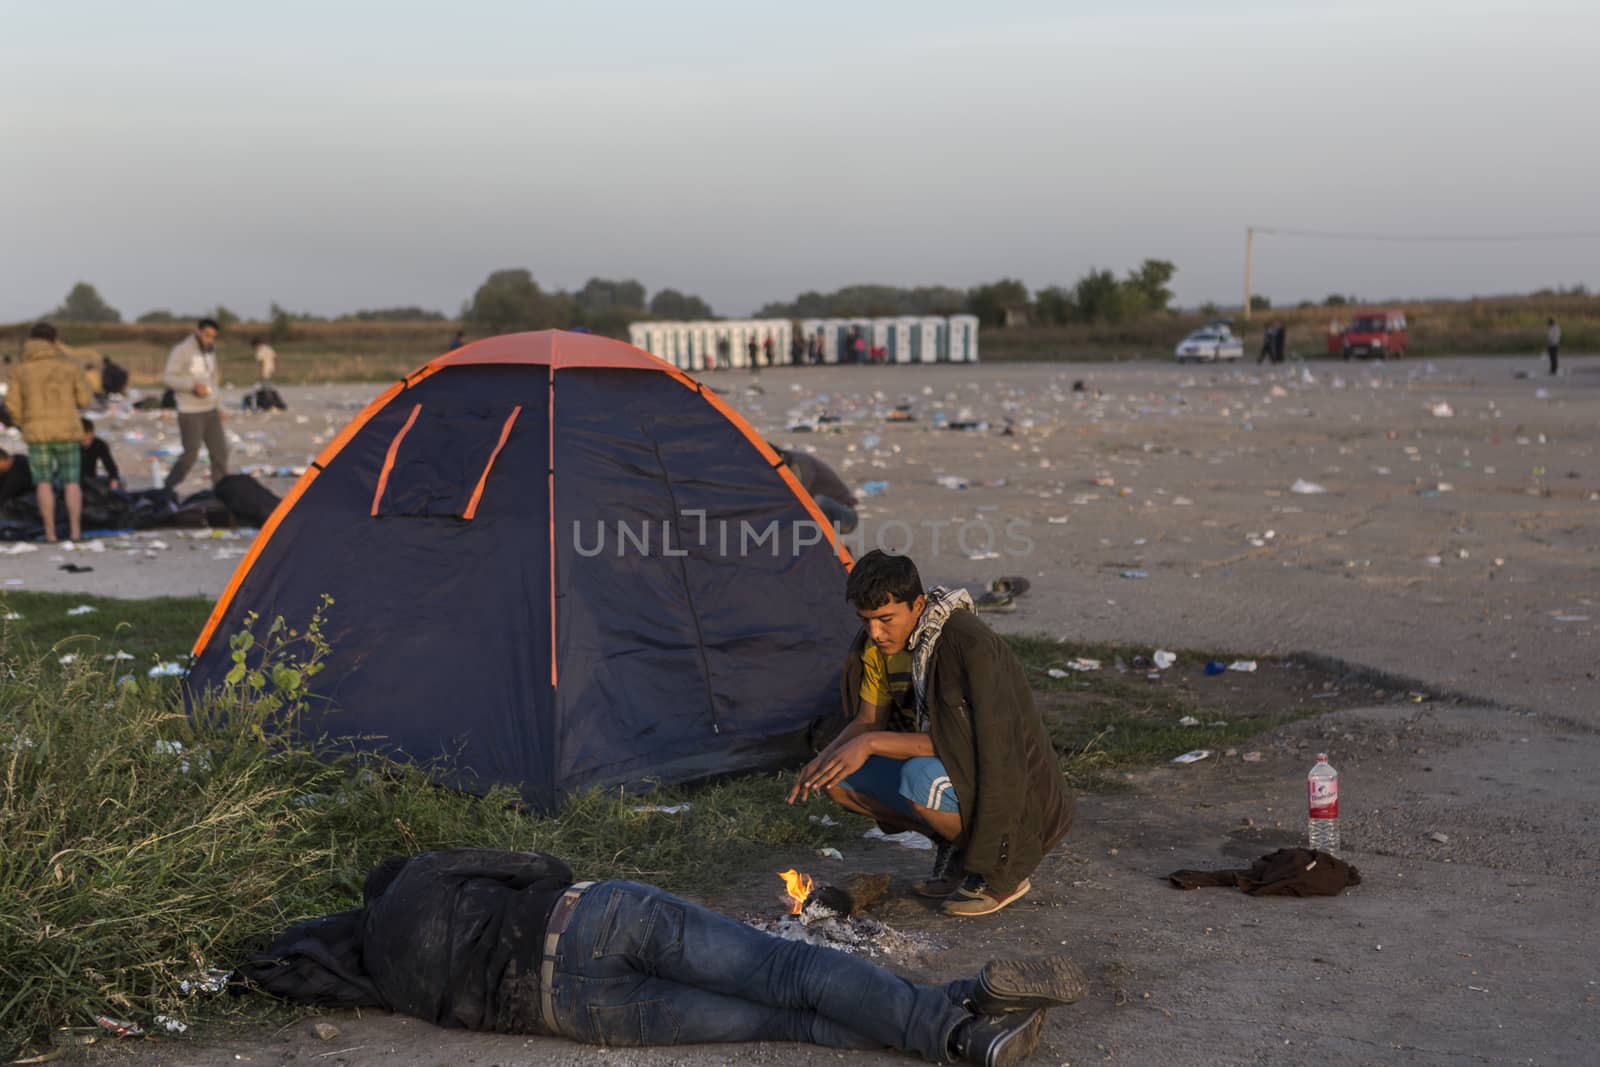 CROATIA, Tovarnik: Refugees camp out in Tovarnik, Croatia near the Serbian-border on September 18, 2015. Refugees are hoping to continue their journey to Germany and Northern Europe via Slovenia 